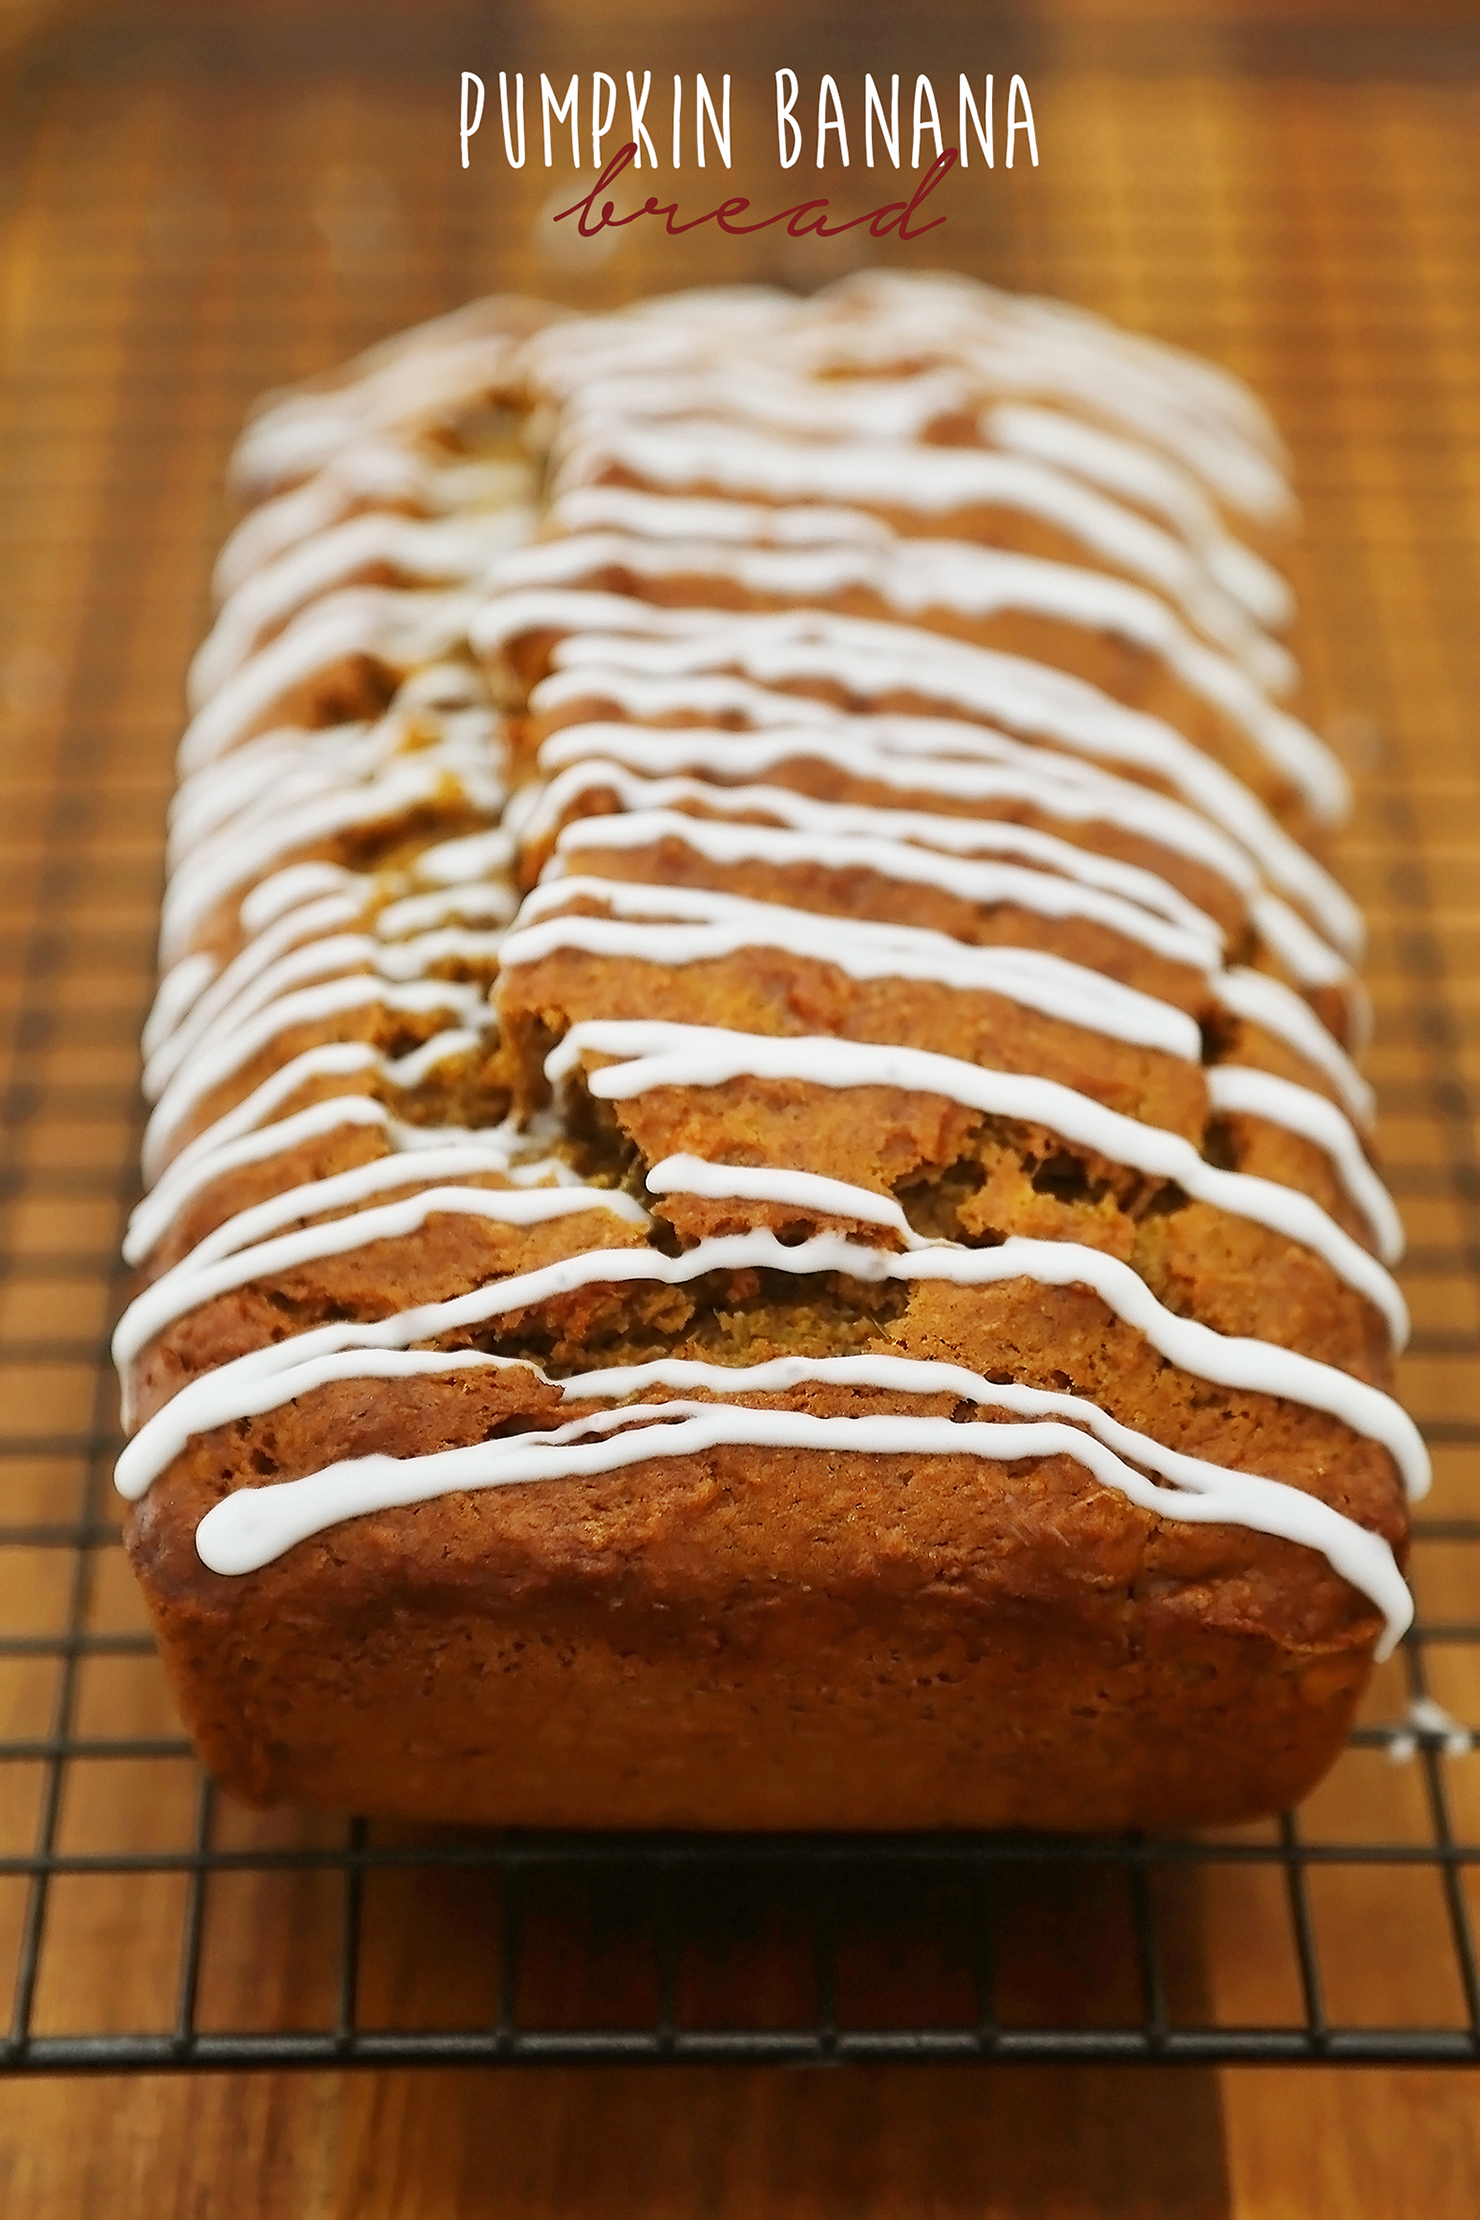 Pumpkin Banana Bread with Vanilla Glaze - Super moist, fluffy pumpkin-banana bread easily baked from scratch! Perfect for gifting or enjoying for breakfast, brunch or dessert. Thecomfortofcooking.com